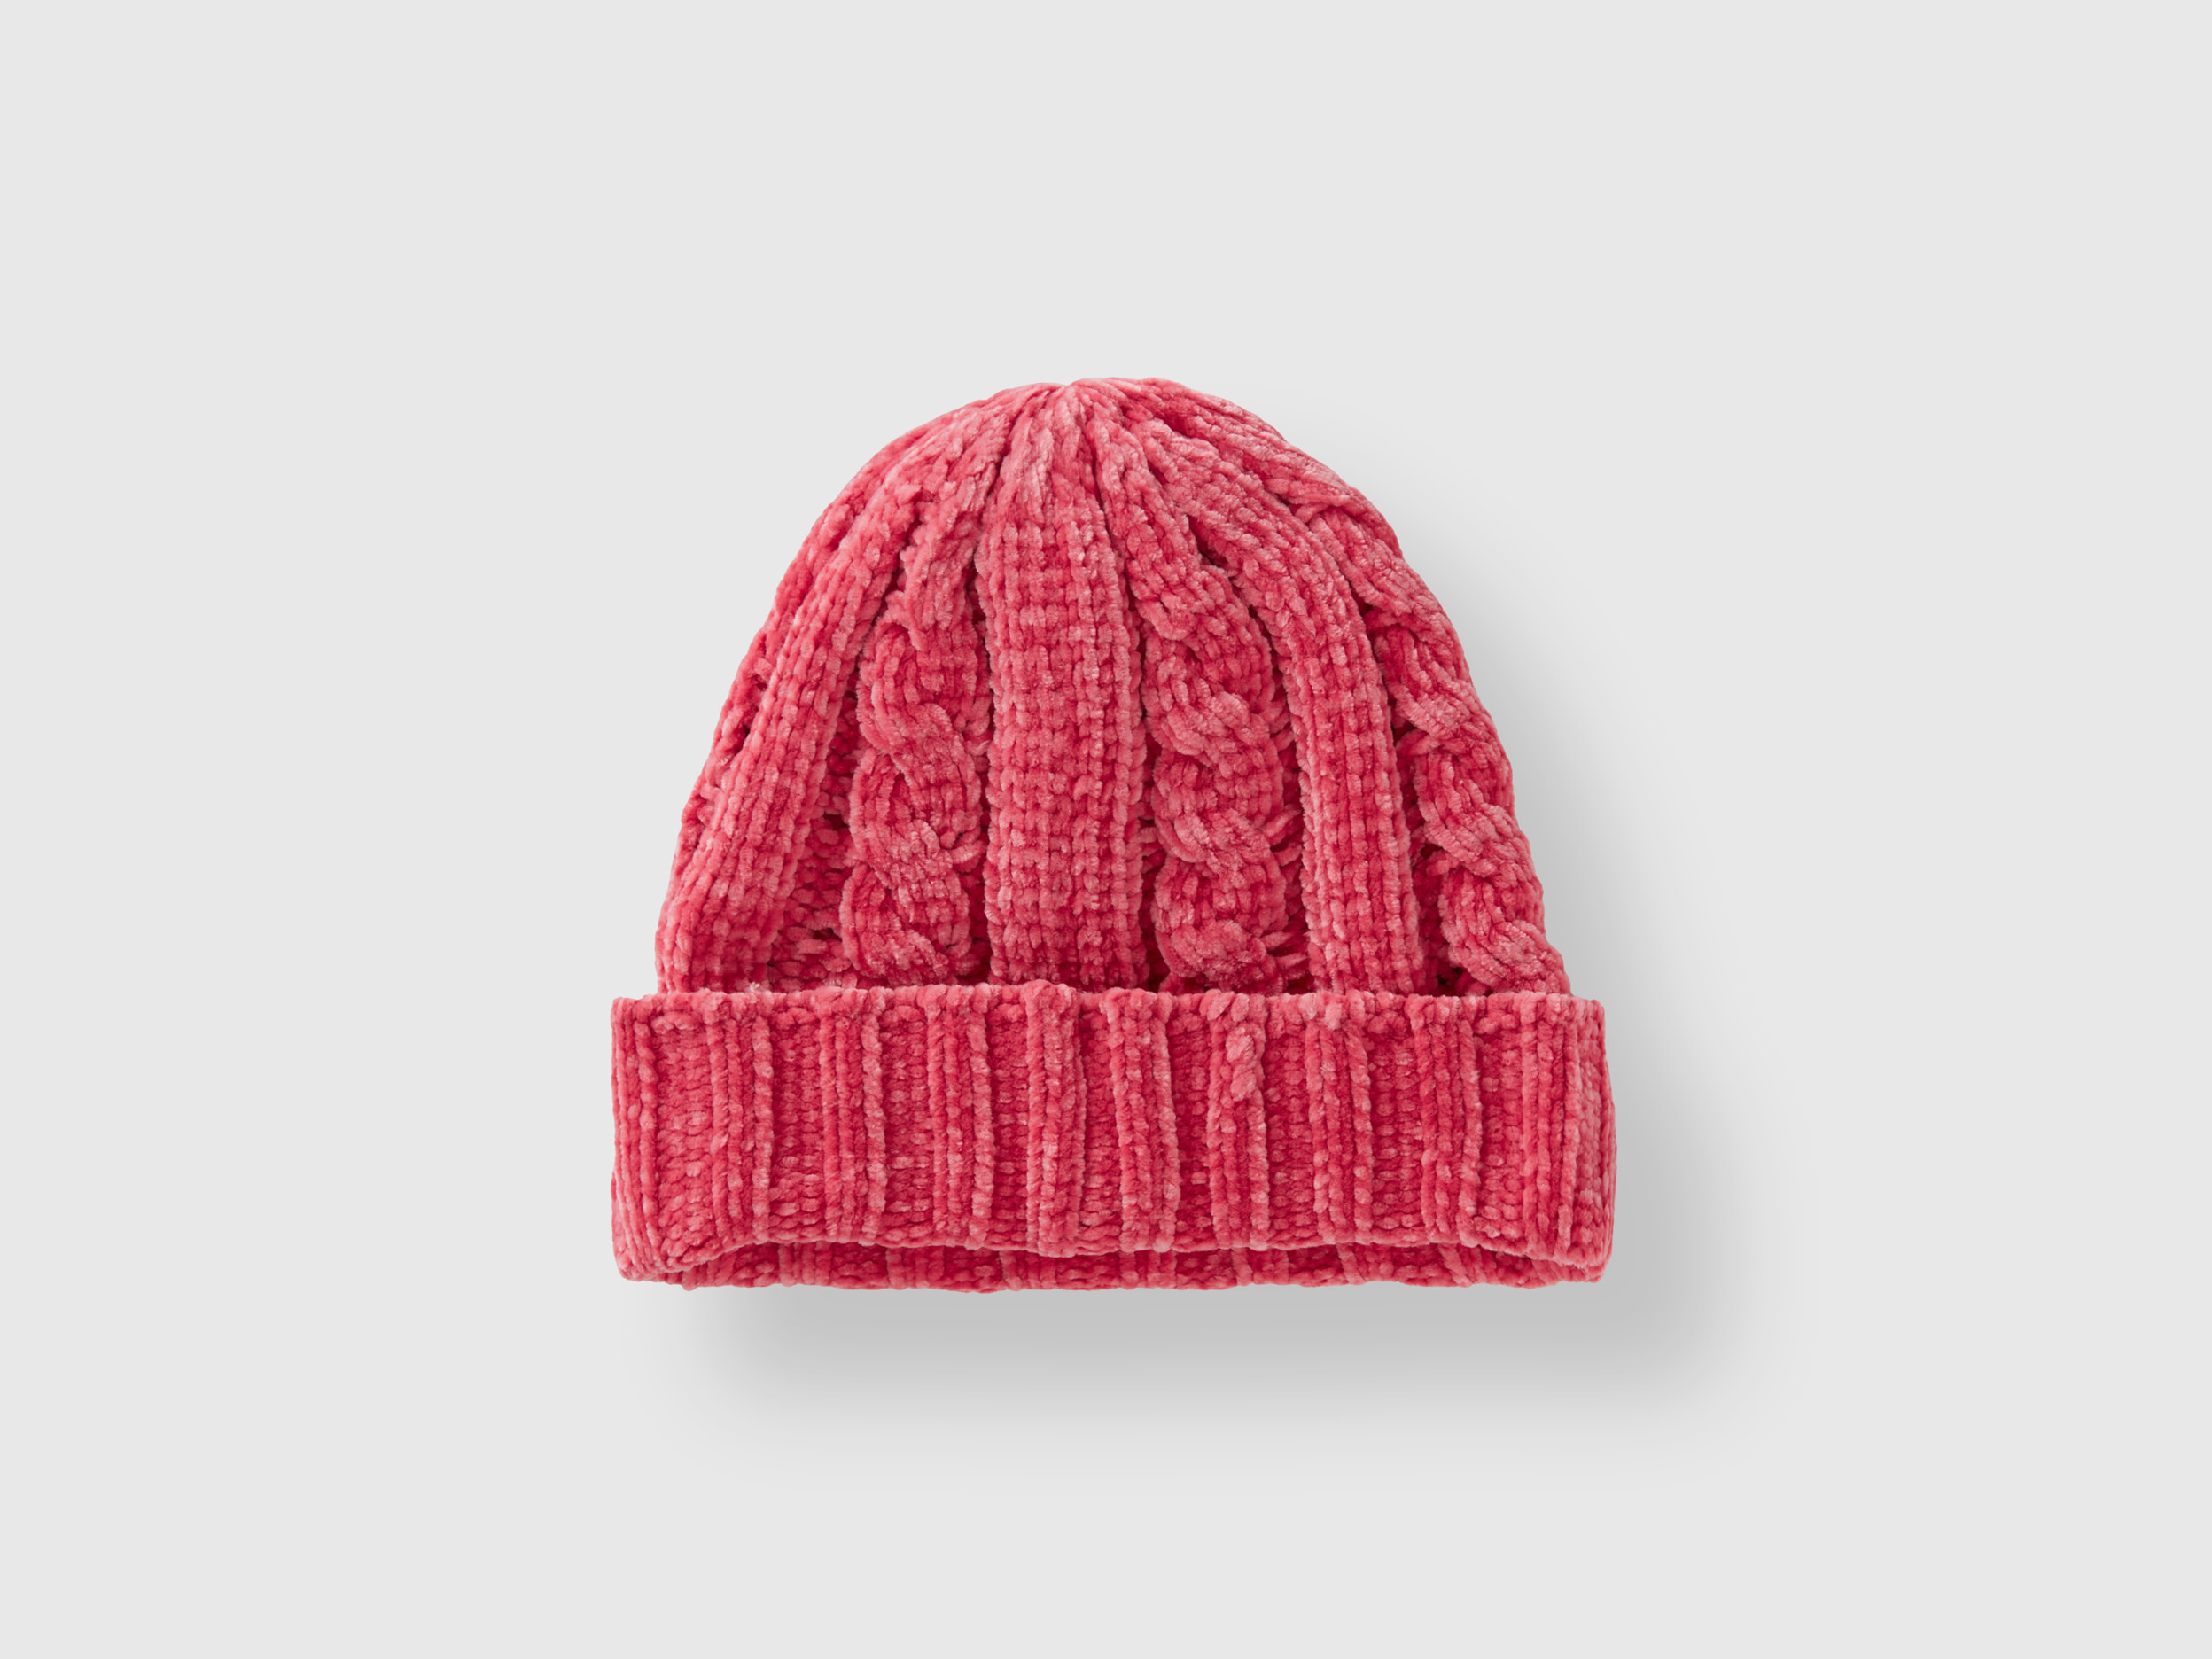 Benetton, Chenille Hat With Cable Knit, size 4-6, Pink, Kids